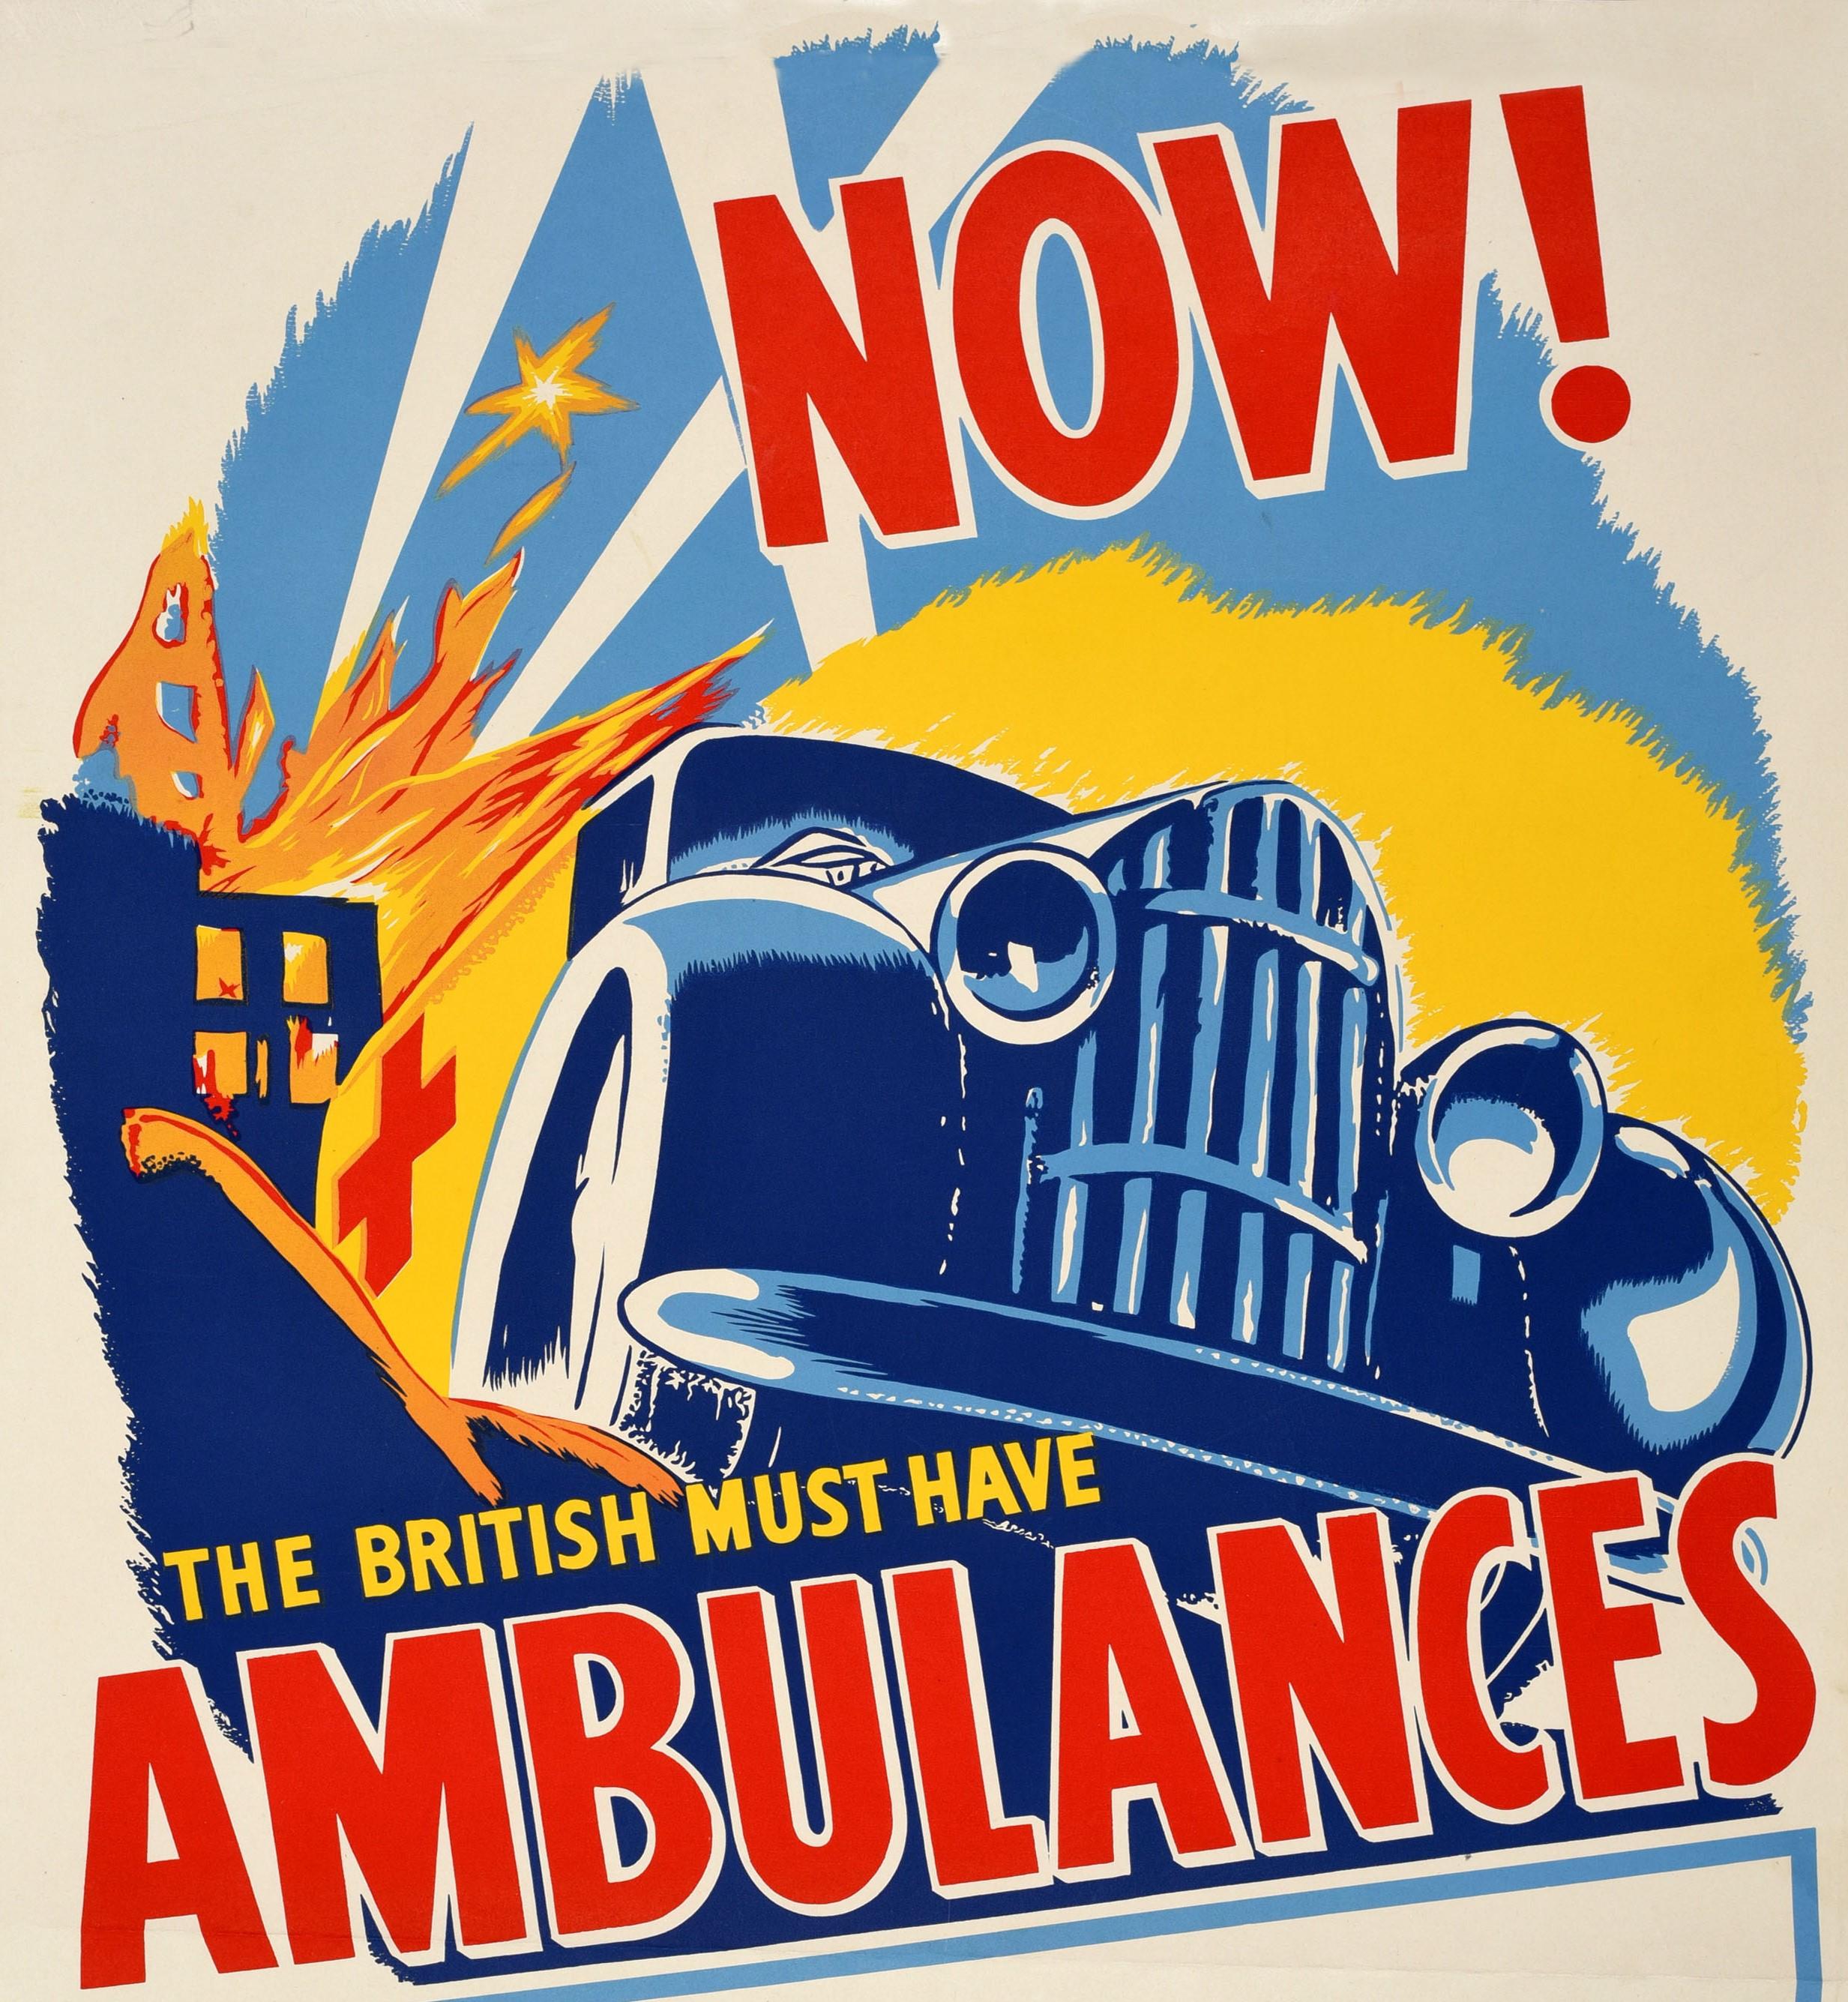 Original Vintage Poster Now! The British Must Have Ambulances WWII Red Cross Aid - Print by Unknown